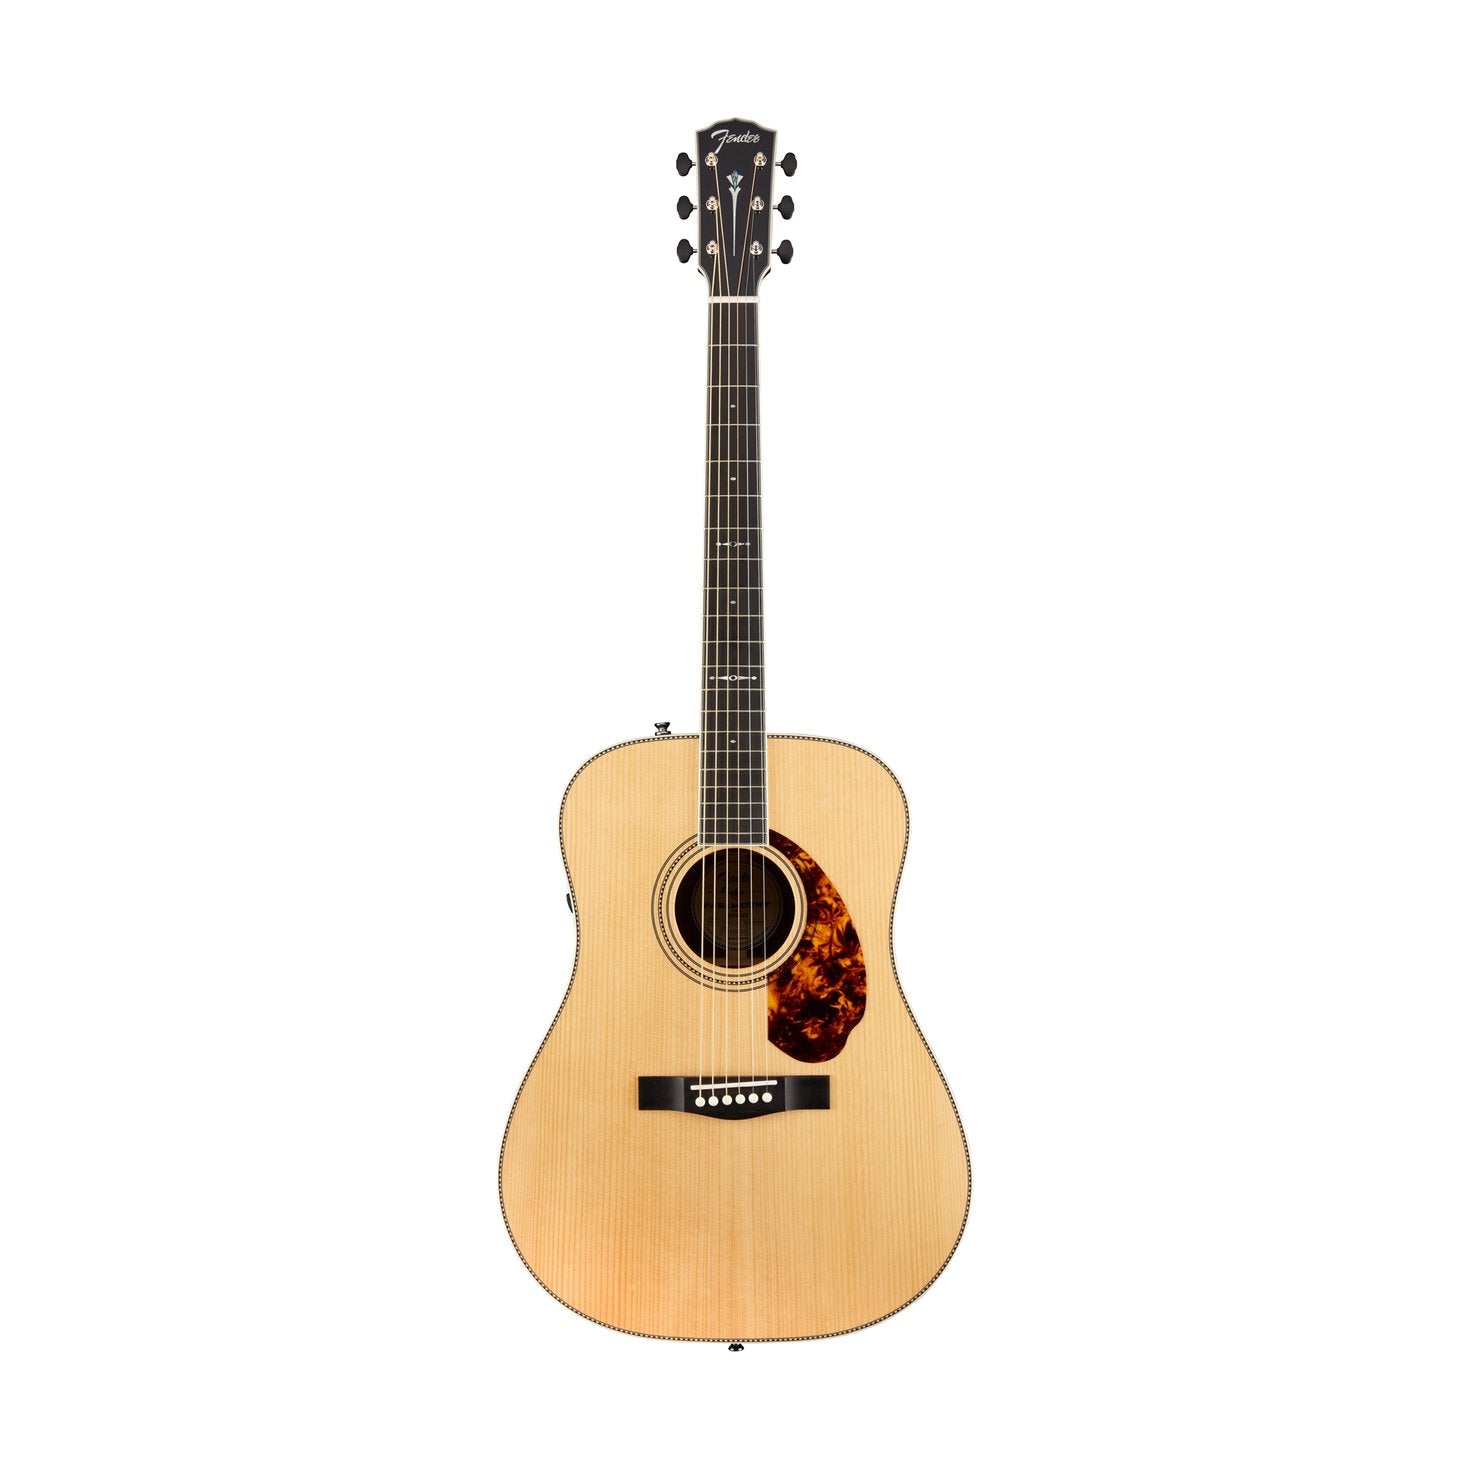 Fender PM-1 Limited Adirondack Dreadnought Acoustic Guitar w/Case, Rosewood, FENDER, ACOUSTIC GUITAR, fender-acoustic-guitar-f03-096-0294-221, ZOSO MUSIC SDN BHD